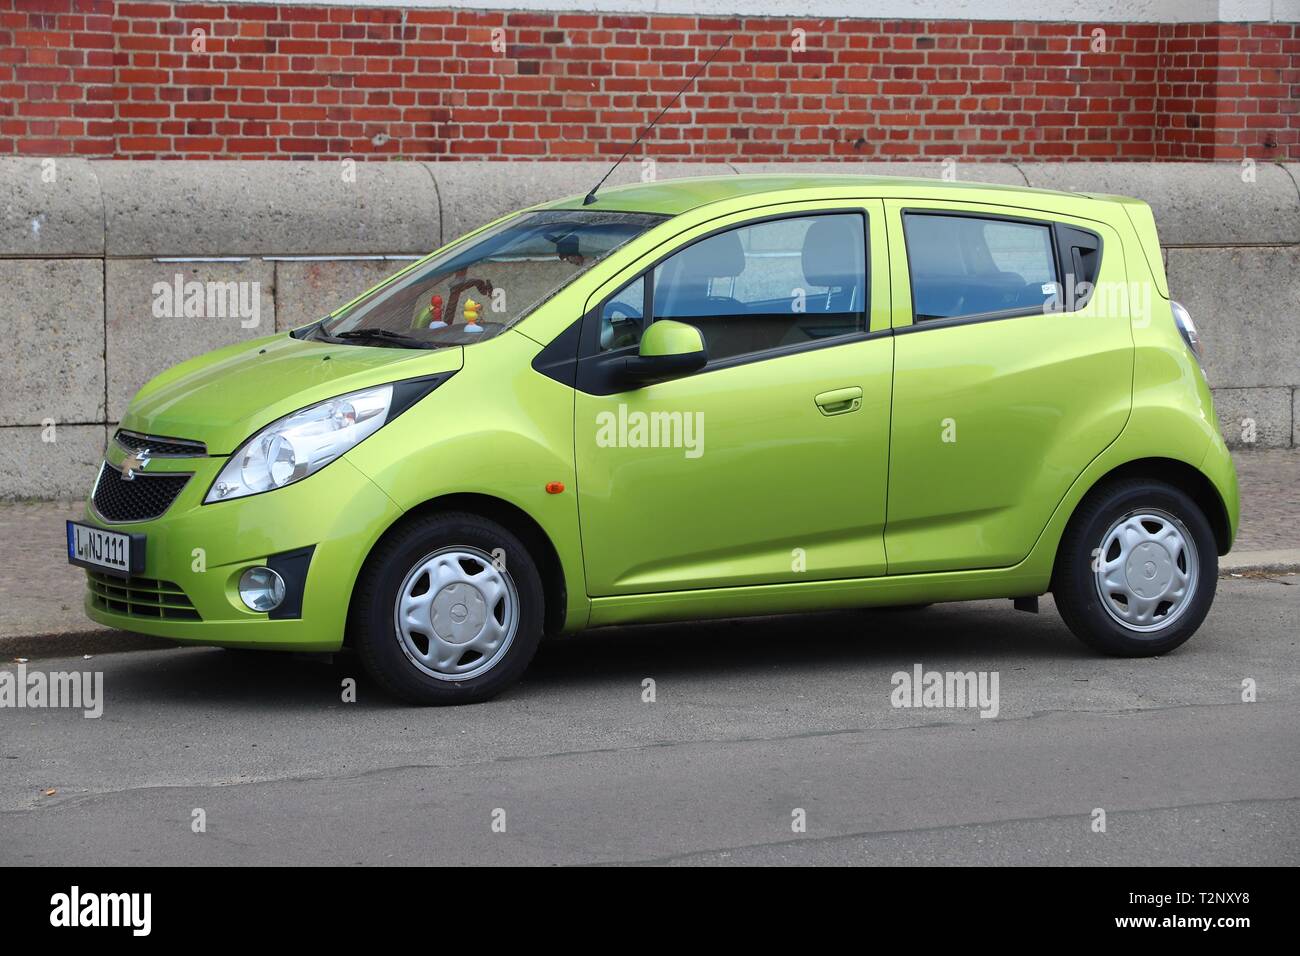 LEIPZIG, GERMANY - MAY 9, 2018: Chevrolet Spark green compact hatchback city car parked in Germany. There were 45.8 million cars registered in Germany Stock Photo